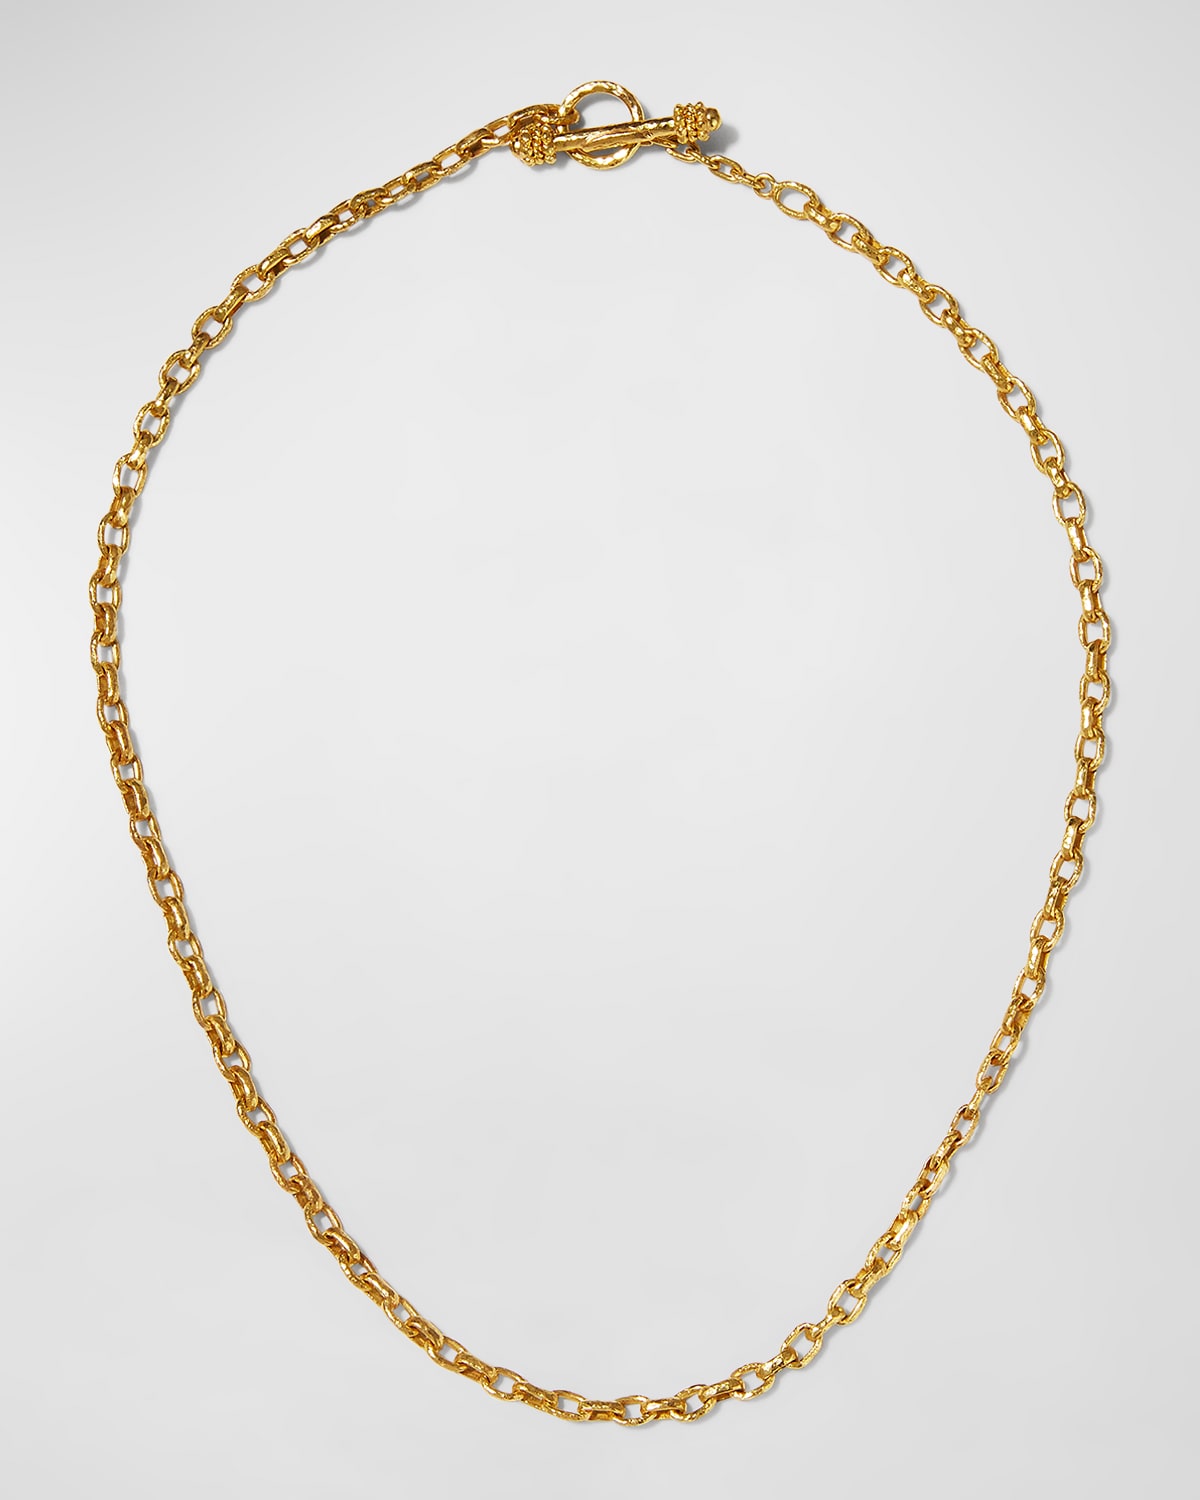 Cortina 19k Gold Link Necklace, 17"L